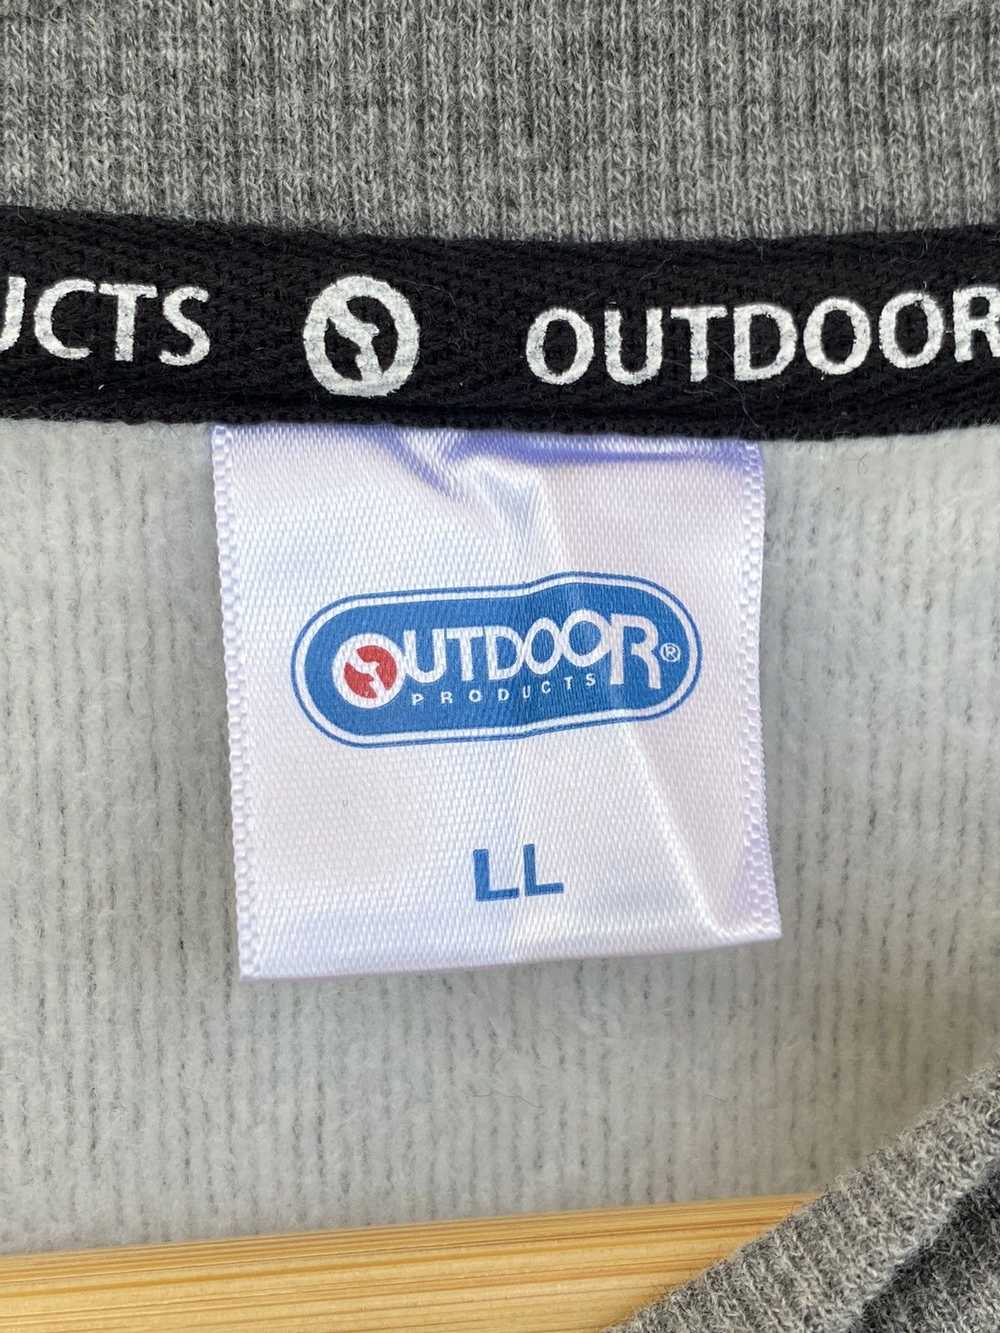 Outdoor Products Outdoor Products Sweatshirt - image 10